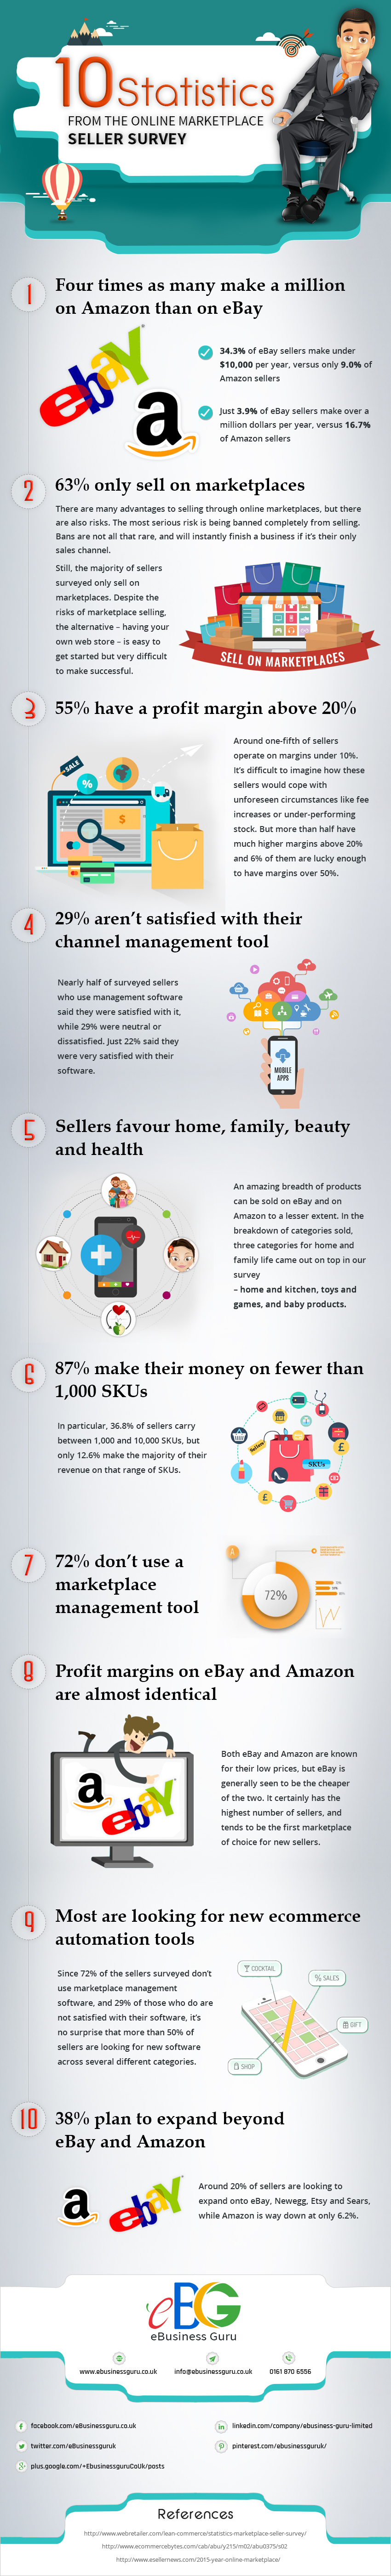 10 Statistics From The Online Marketplace Seller Survey